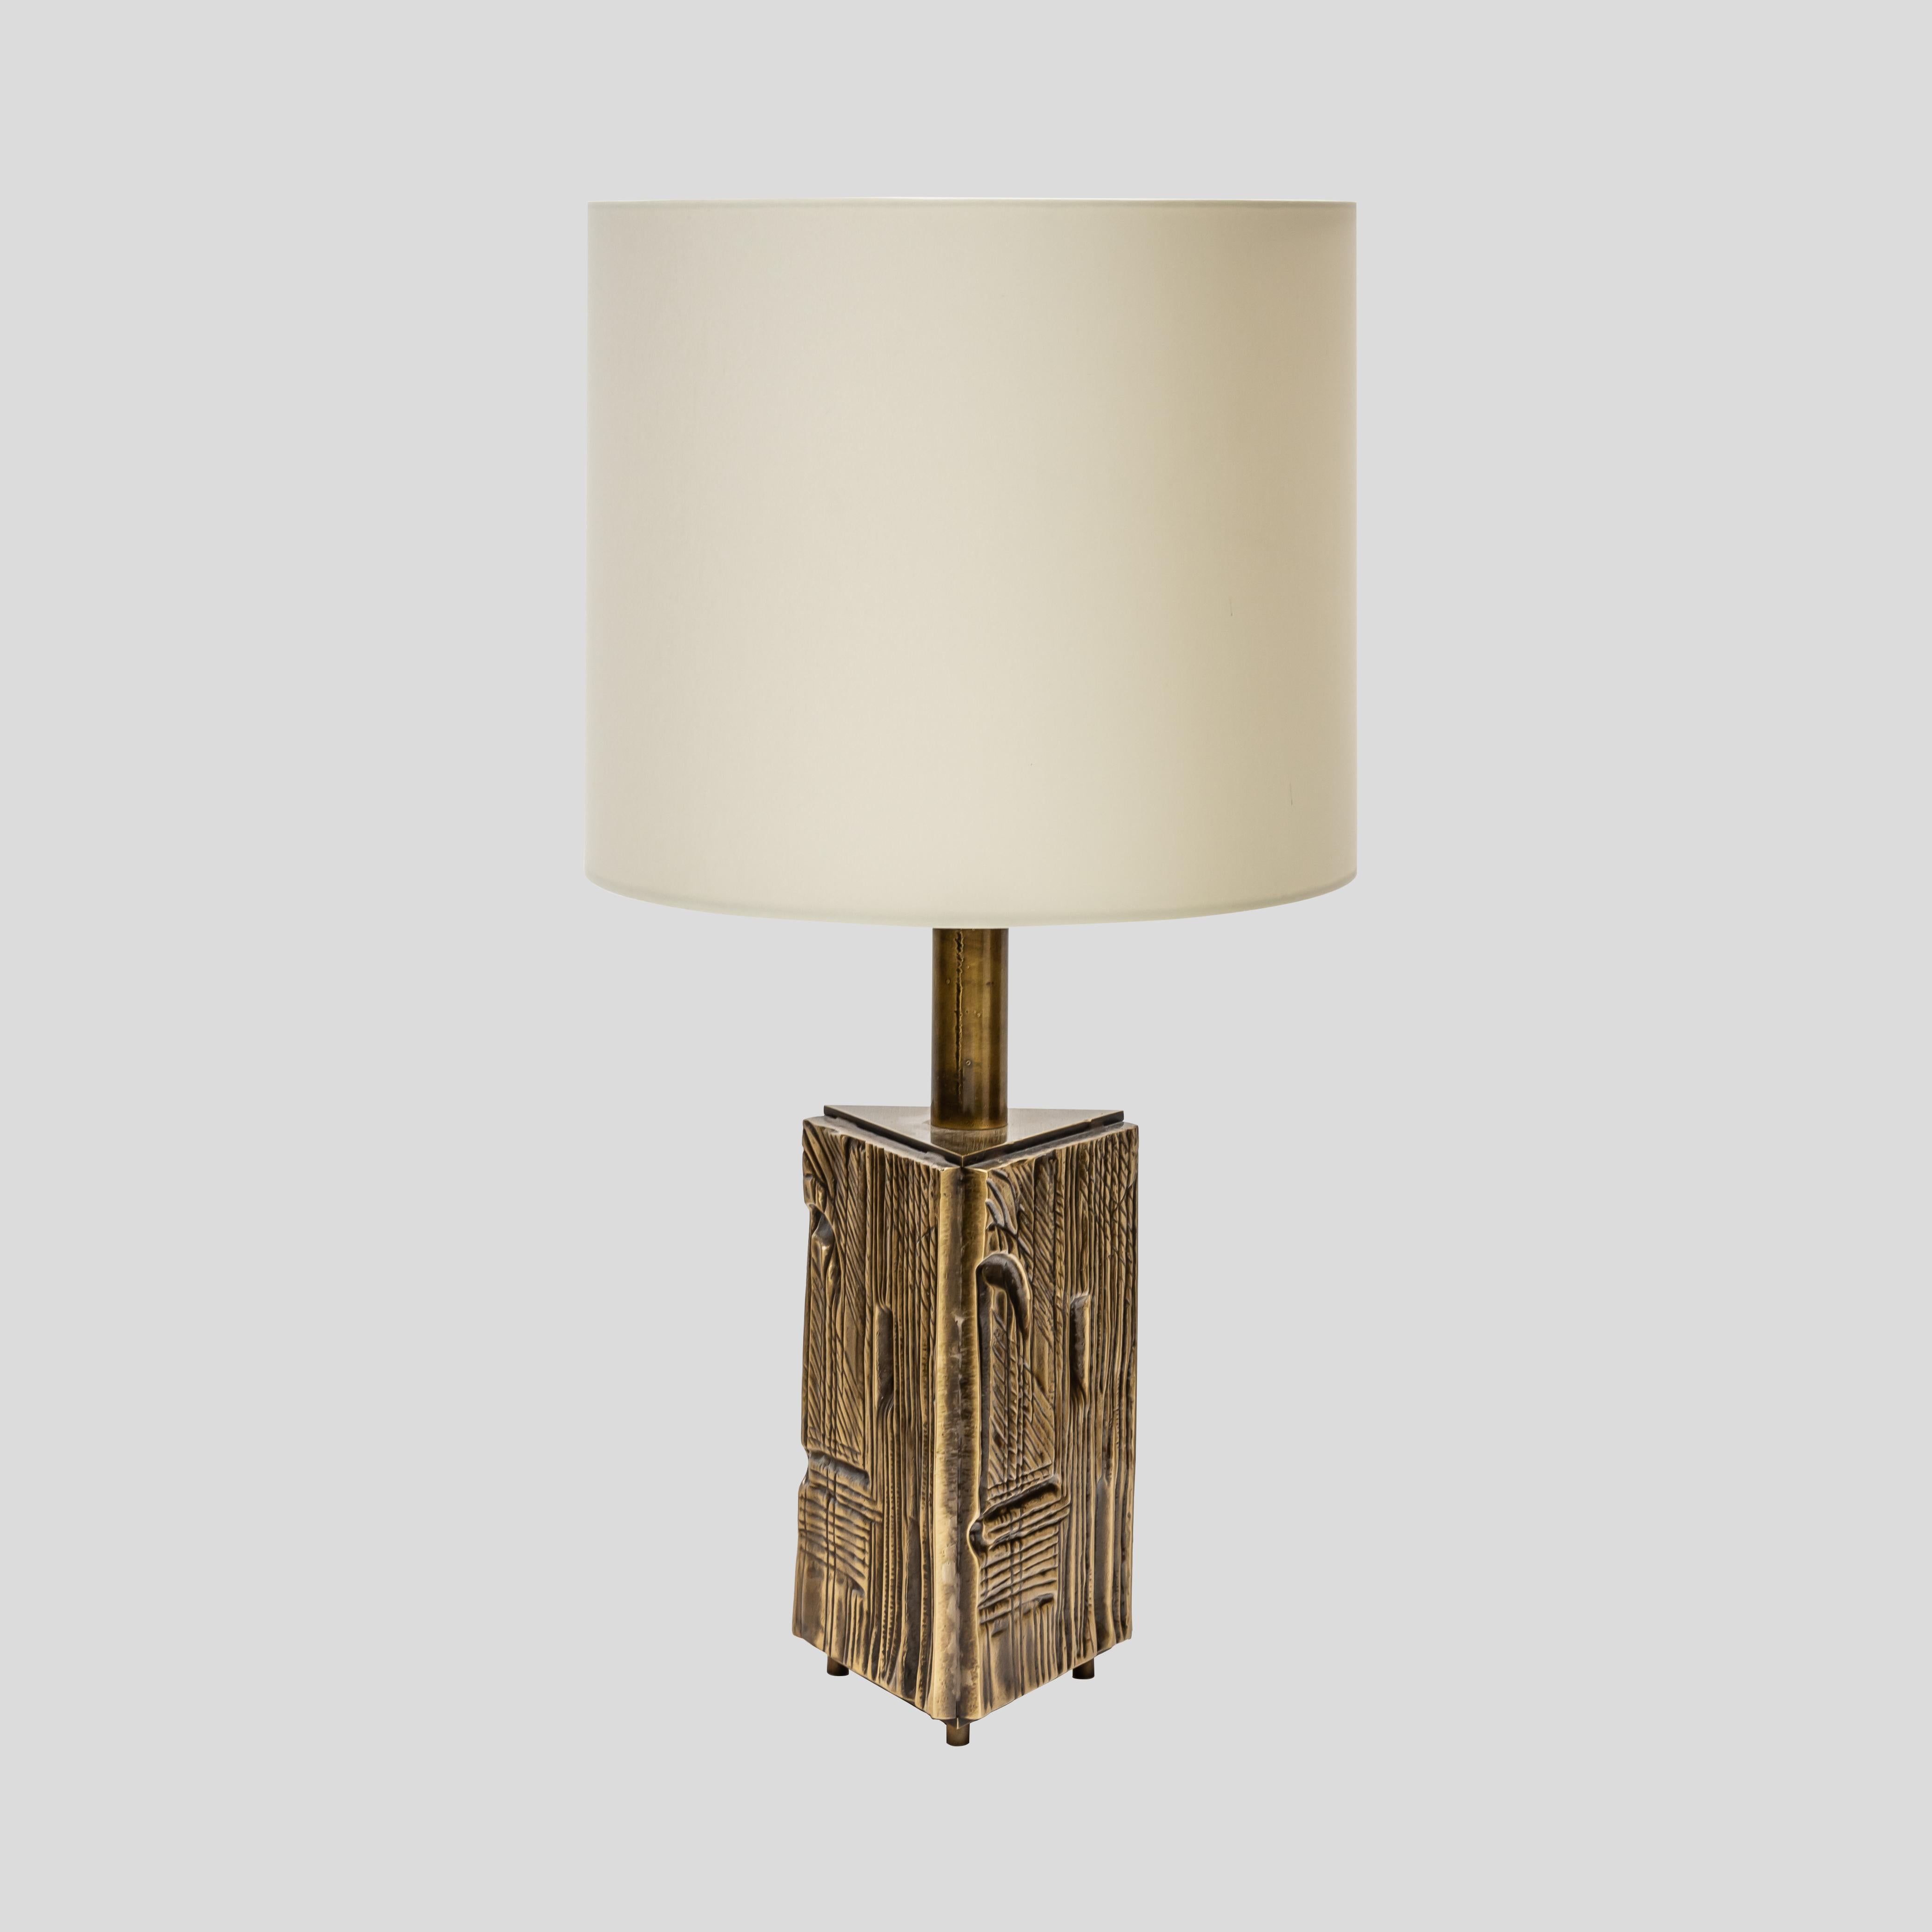 Triangular prism brass structure with the original patina, decorated with abstract motifs in a low relief technique on three feet.
This pair comes with cylindrical shaped cream white colour matt silk shades.
1960s Italian design by artist Luciano